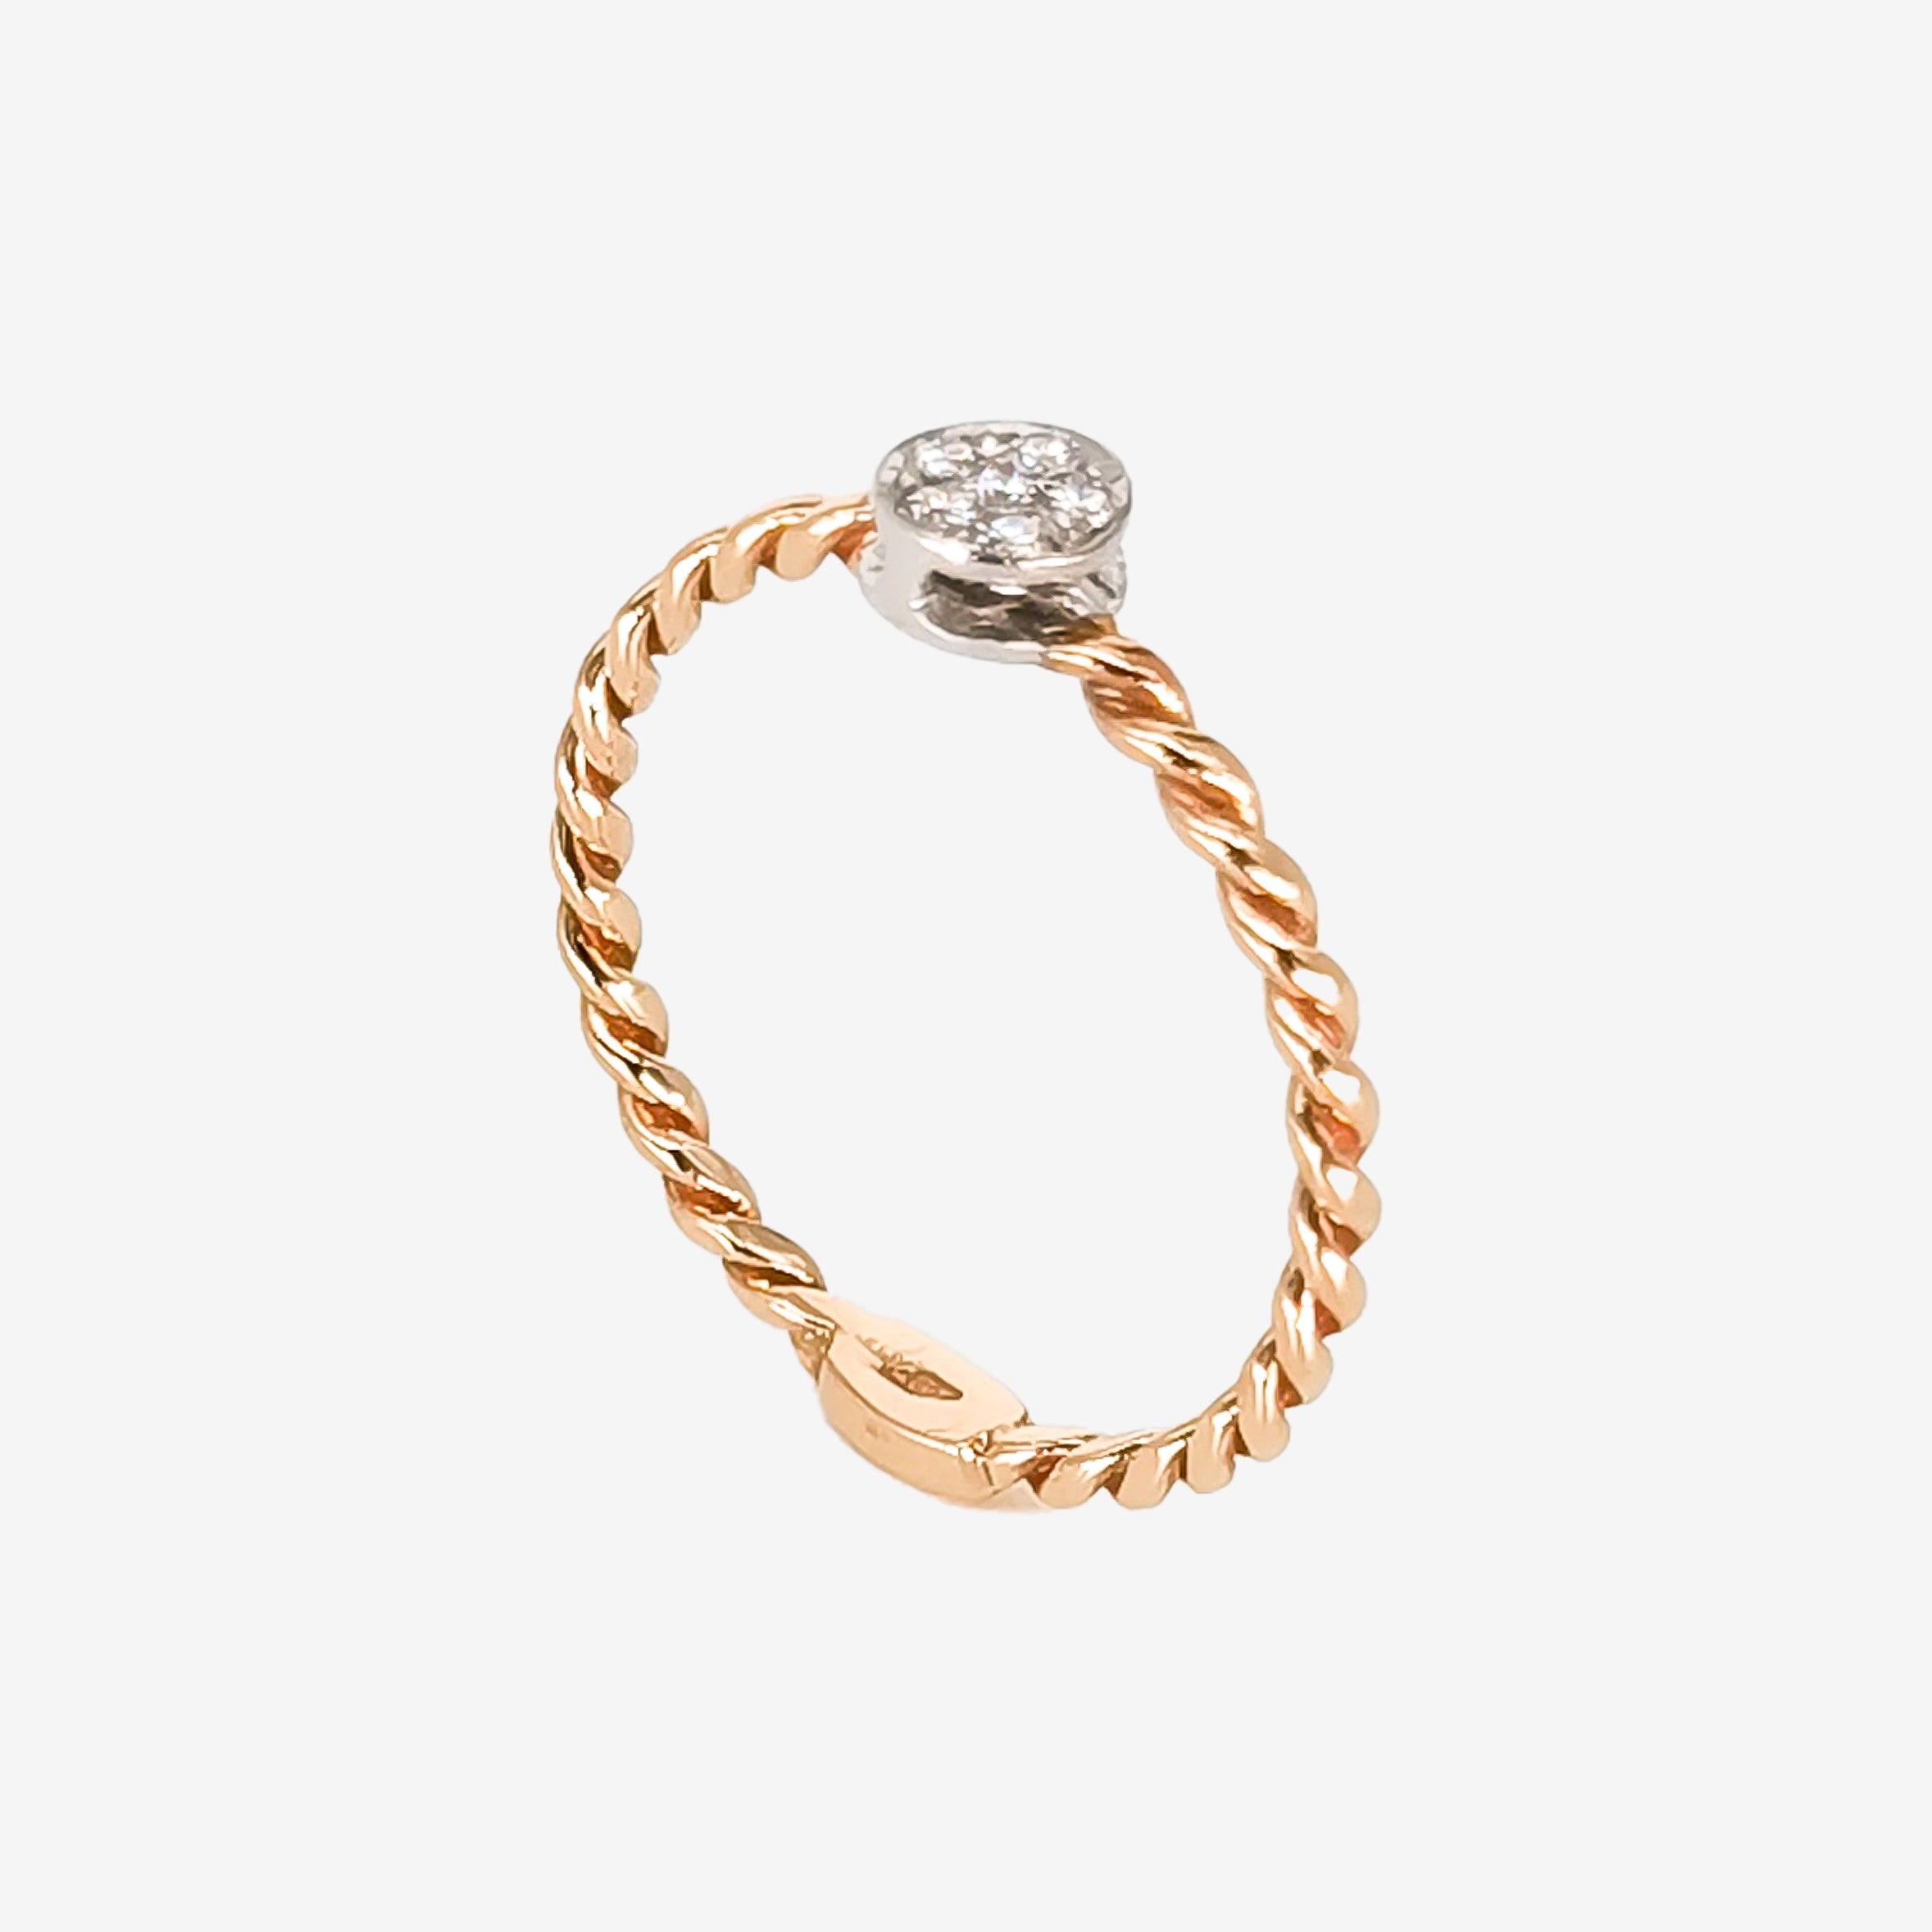 Twisted Braided Gold Ring with Diamonds!! -25%!!